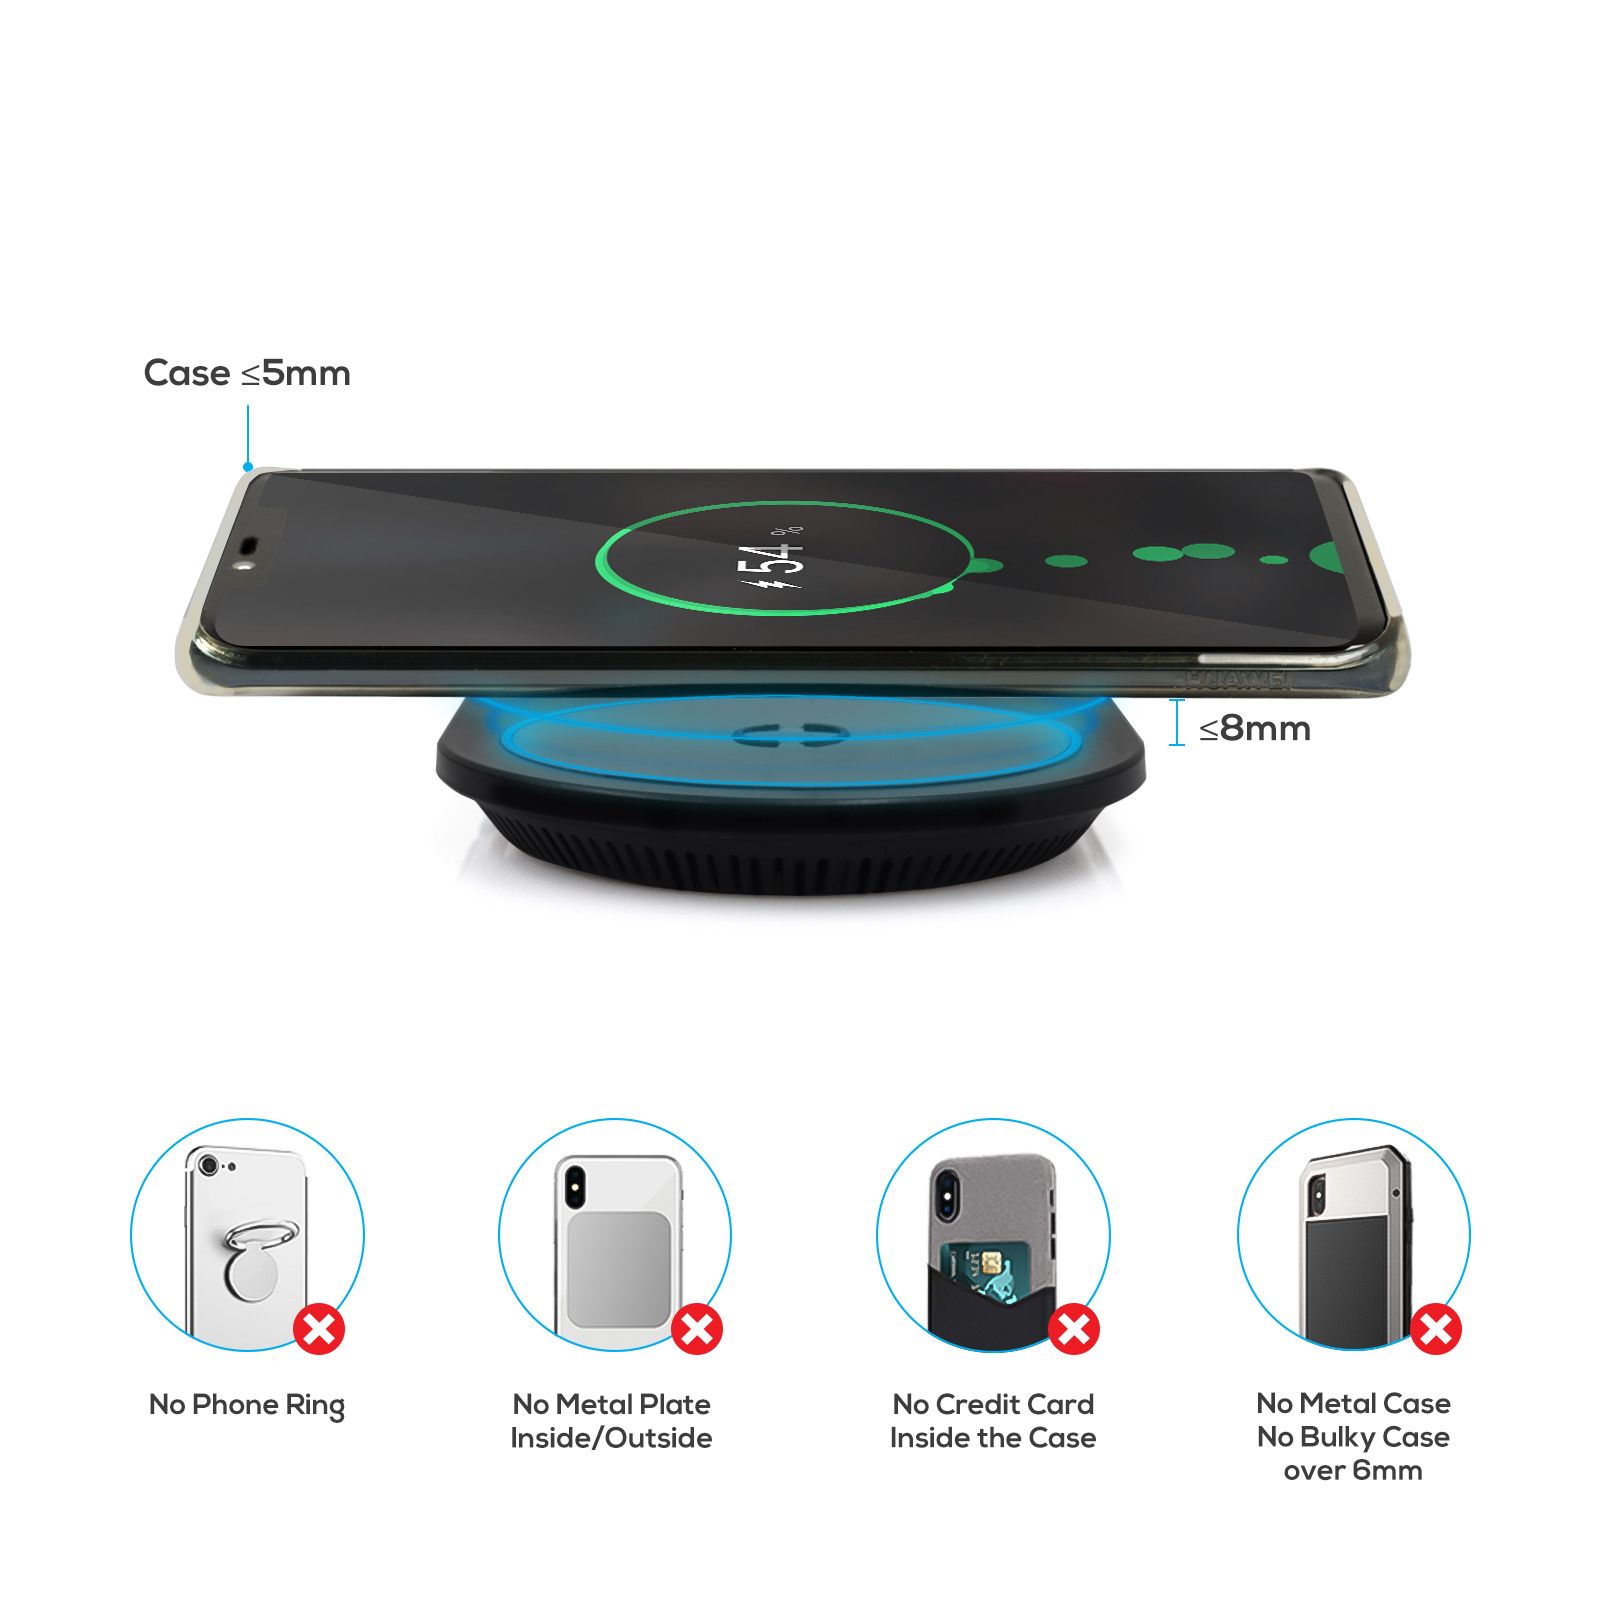 A large marketing image providing additional information about the product mbeat Gorilla Power 3-in-1 Wireless Charging Stand - Additional alt info not provided